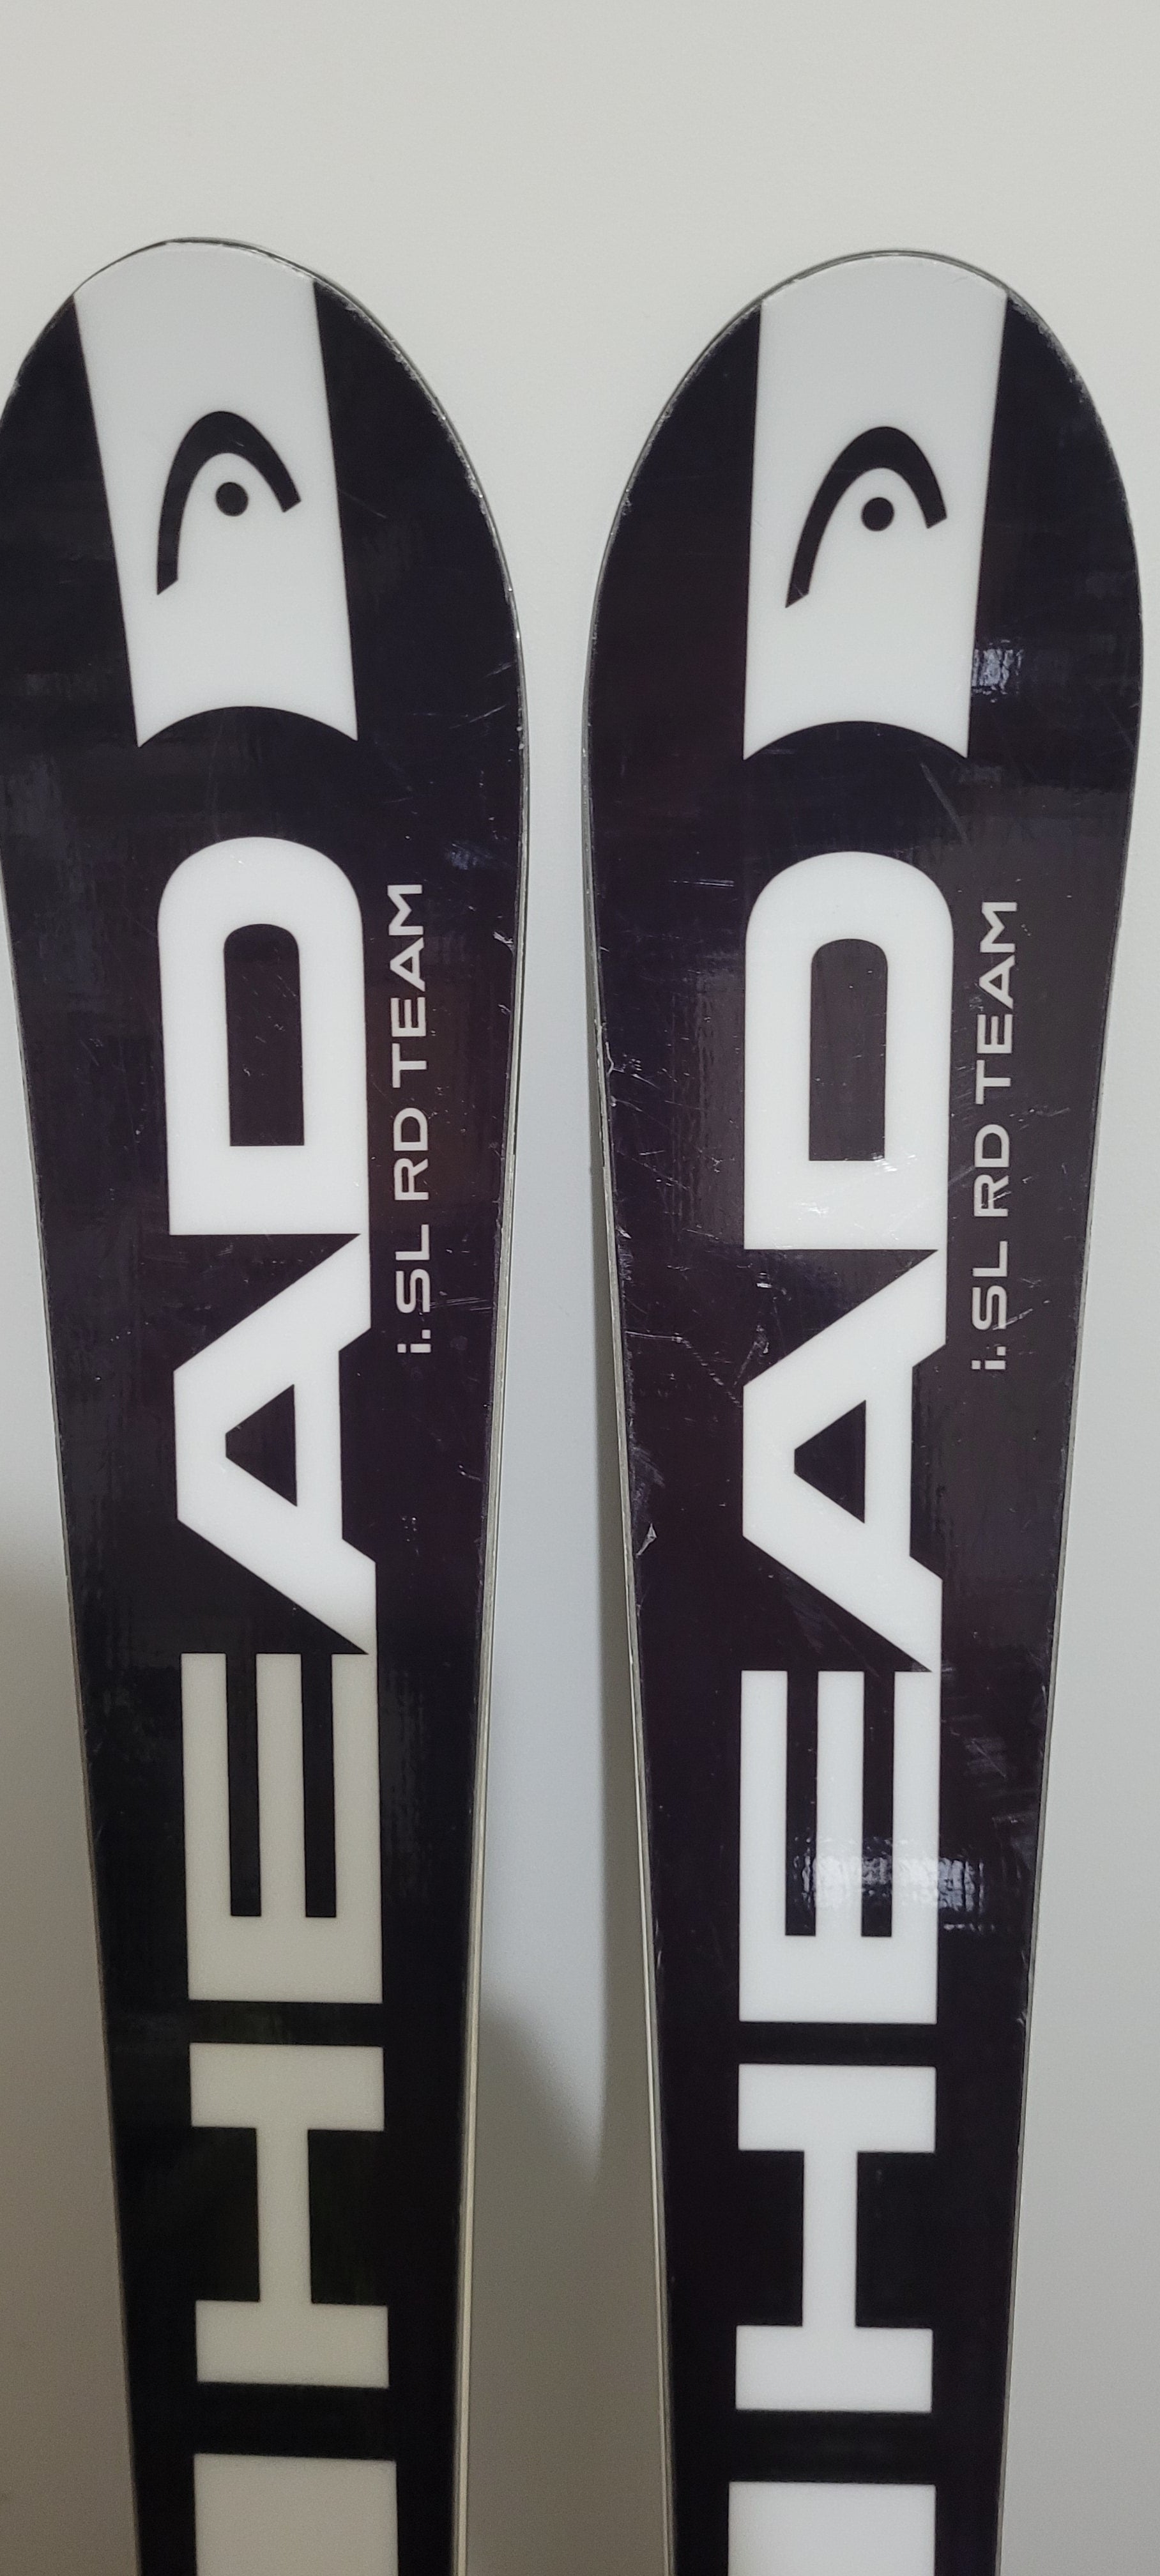 Used JR HEAD 138 cm Racing World Cup Rebels i.SL RD Skis Without 